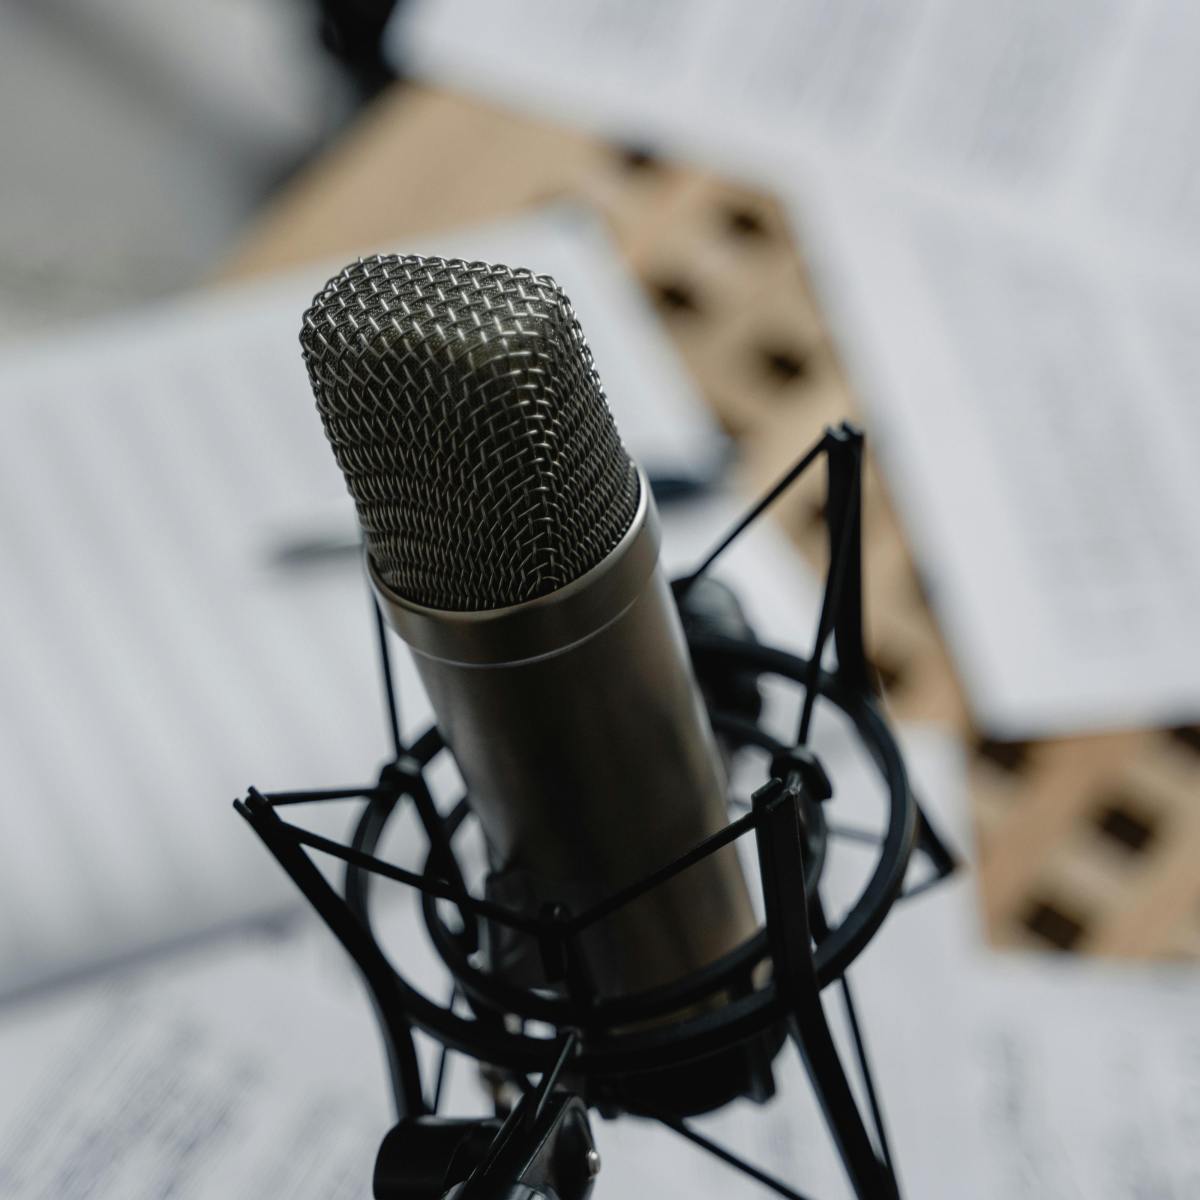 Foundry’s Podcast Recording Studio Is Perfect For Content Creators